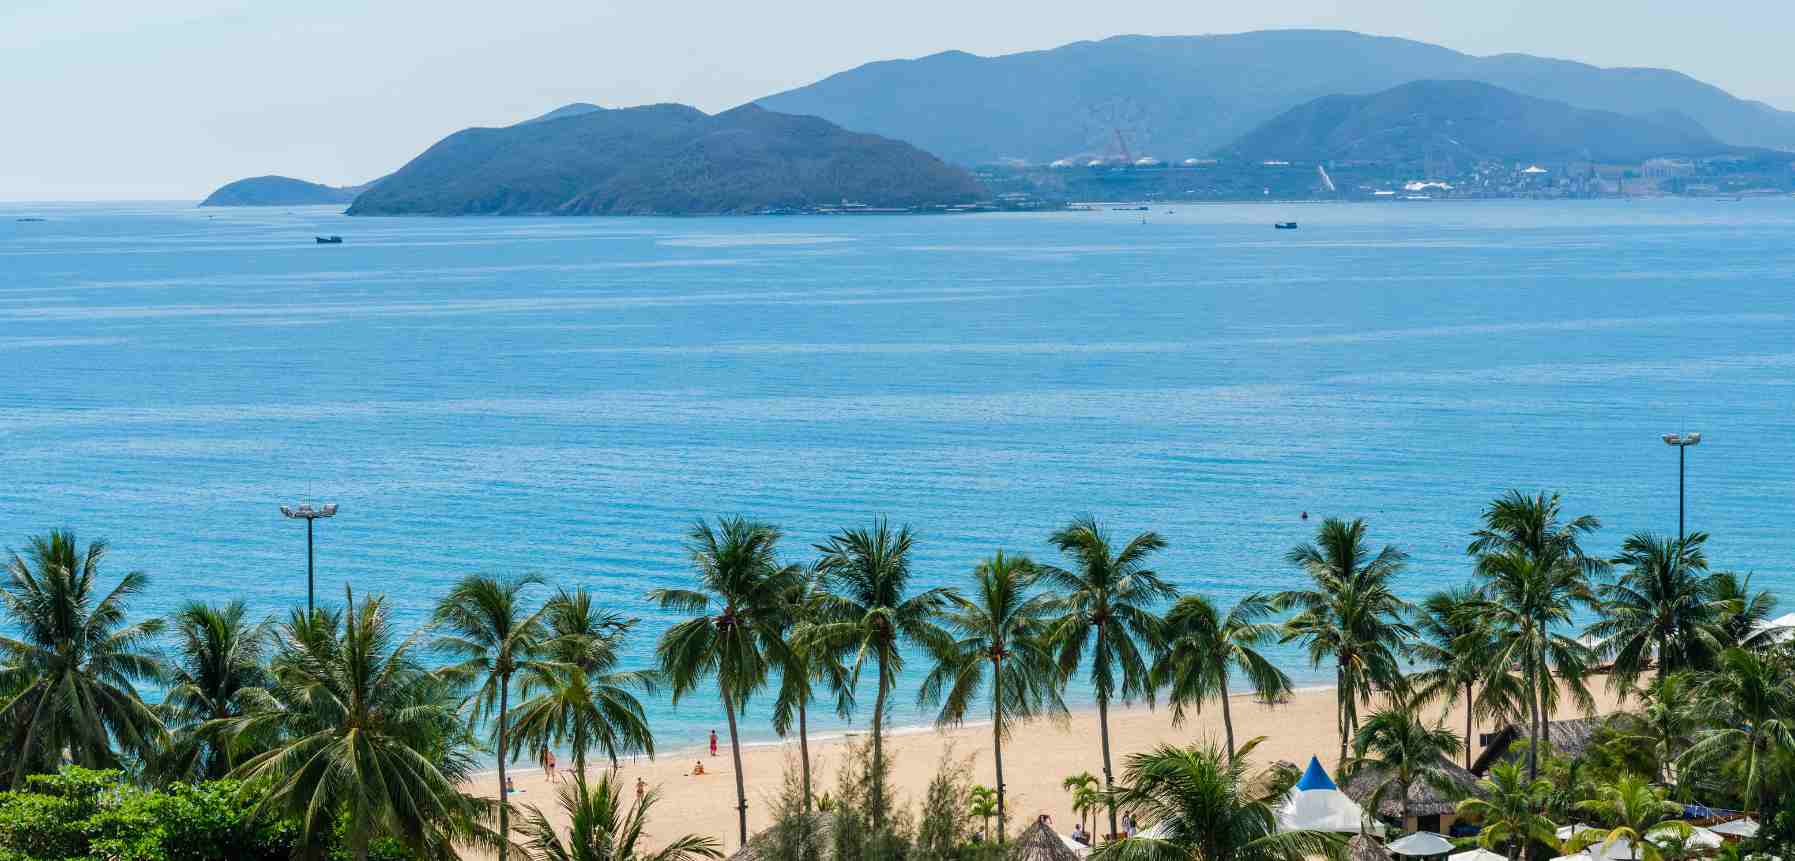 Discover the beauty of Nha Trang's beaches